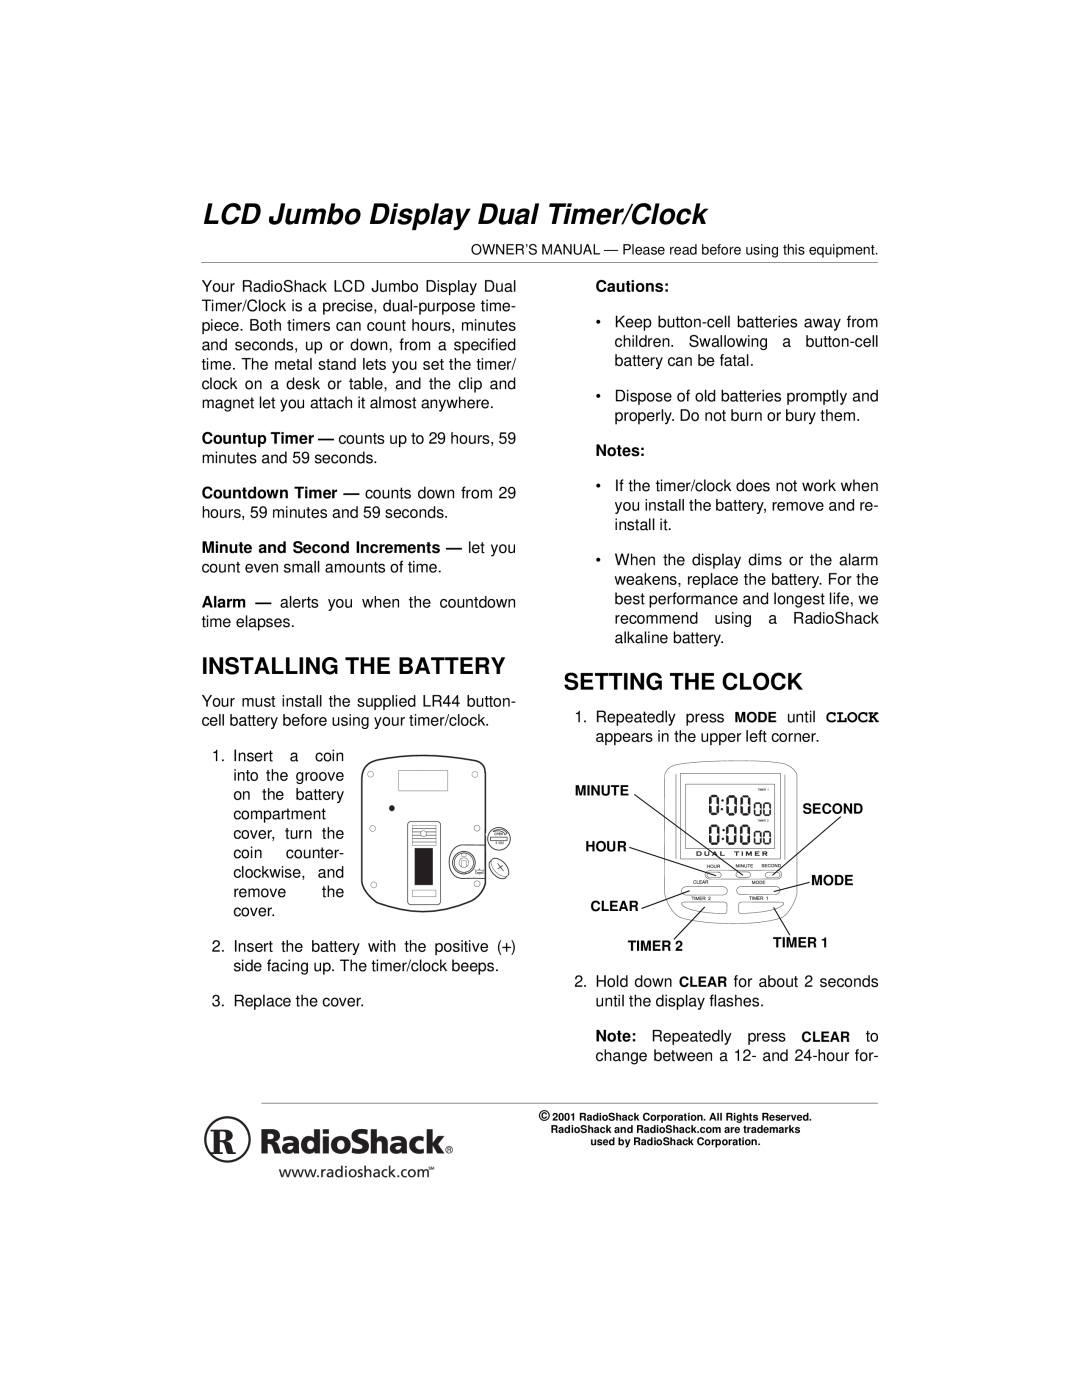 Radio Shack 63-898A owner manual Installing The Battery, Setting The Clock, Cautions, LCD Jumbo Display Dual Timer/Clock 